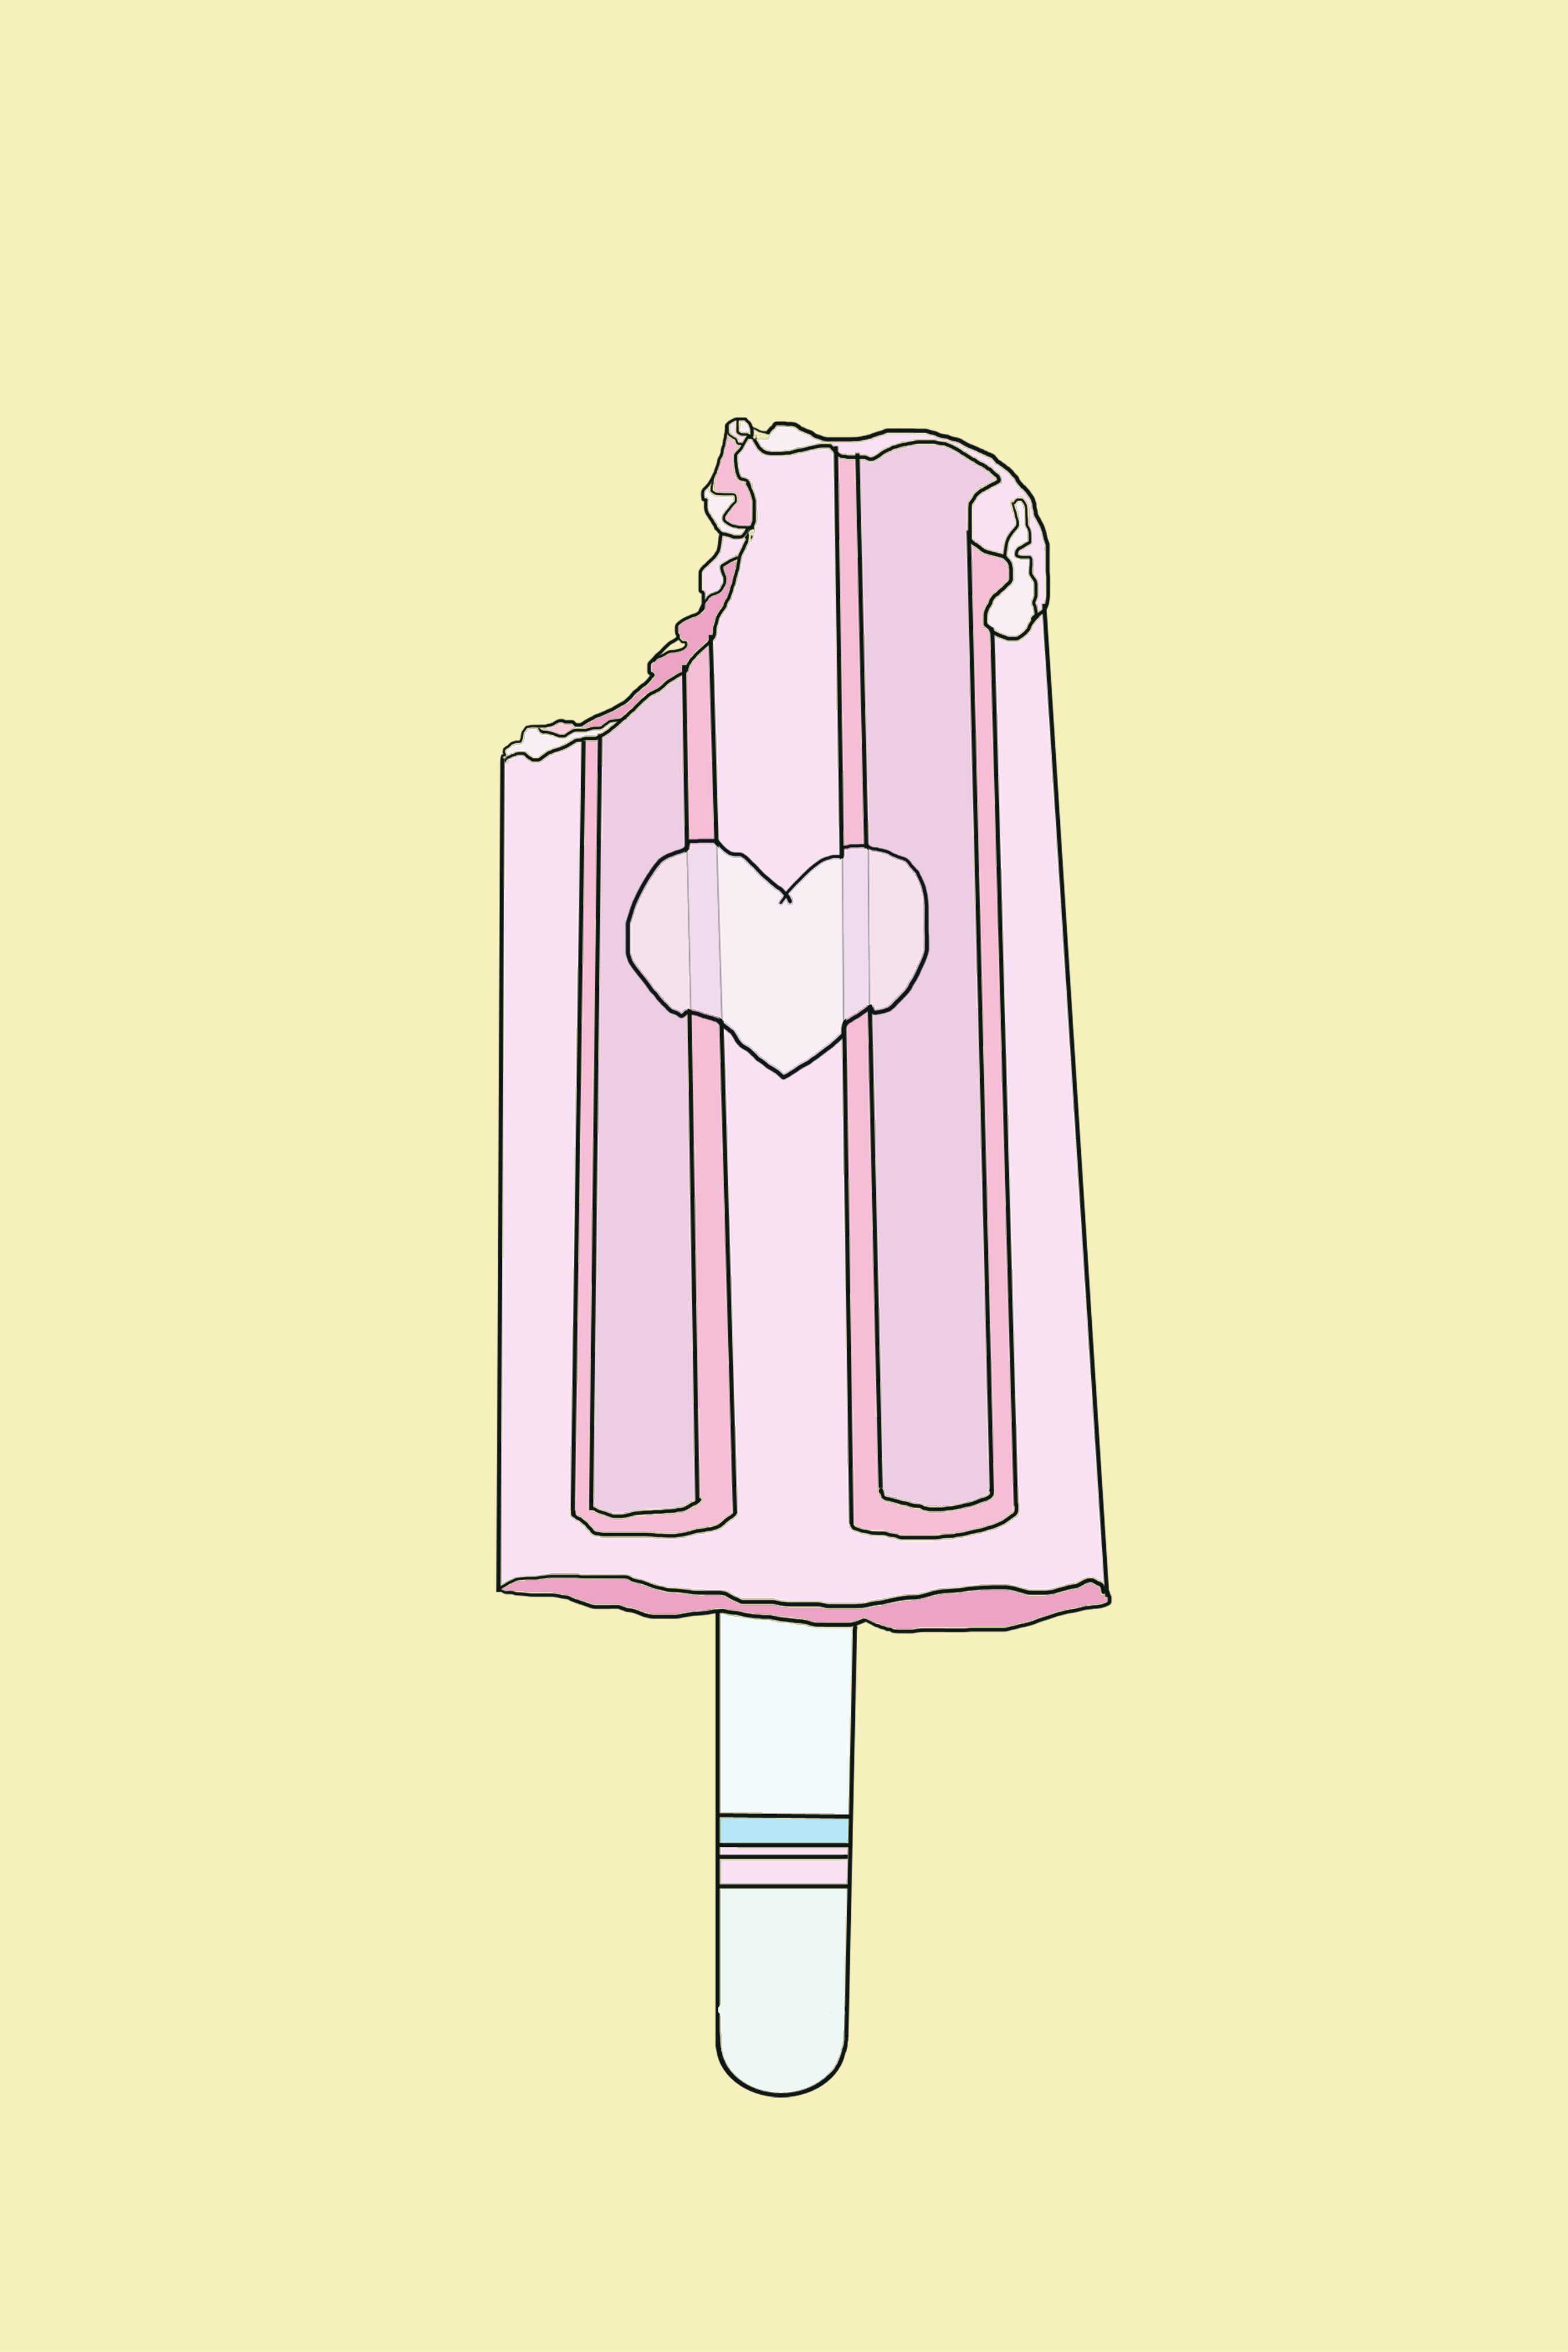 art every day number 442 popsicle with heart treats valentines day